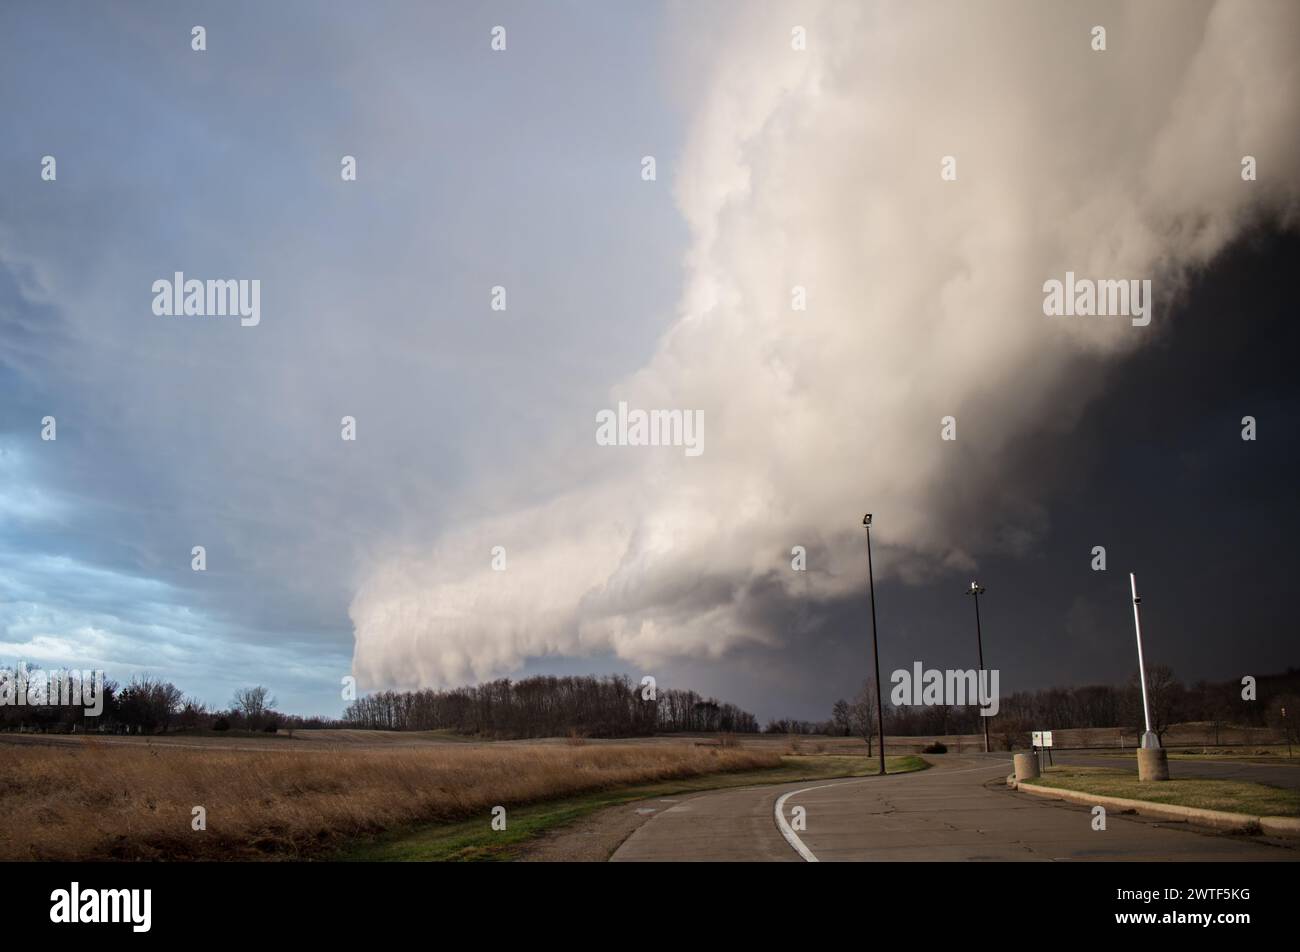 An immense shelf cloud and severe thunderstorm approaches rapidly with a road and streetlights in the foreground Stock Photo